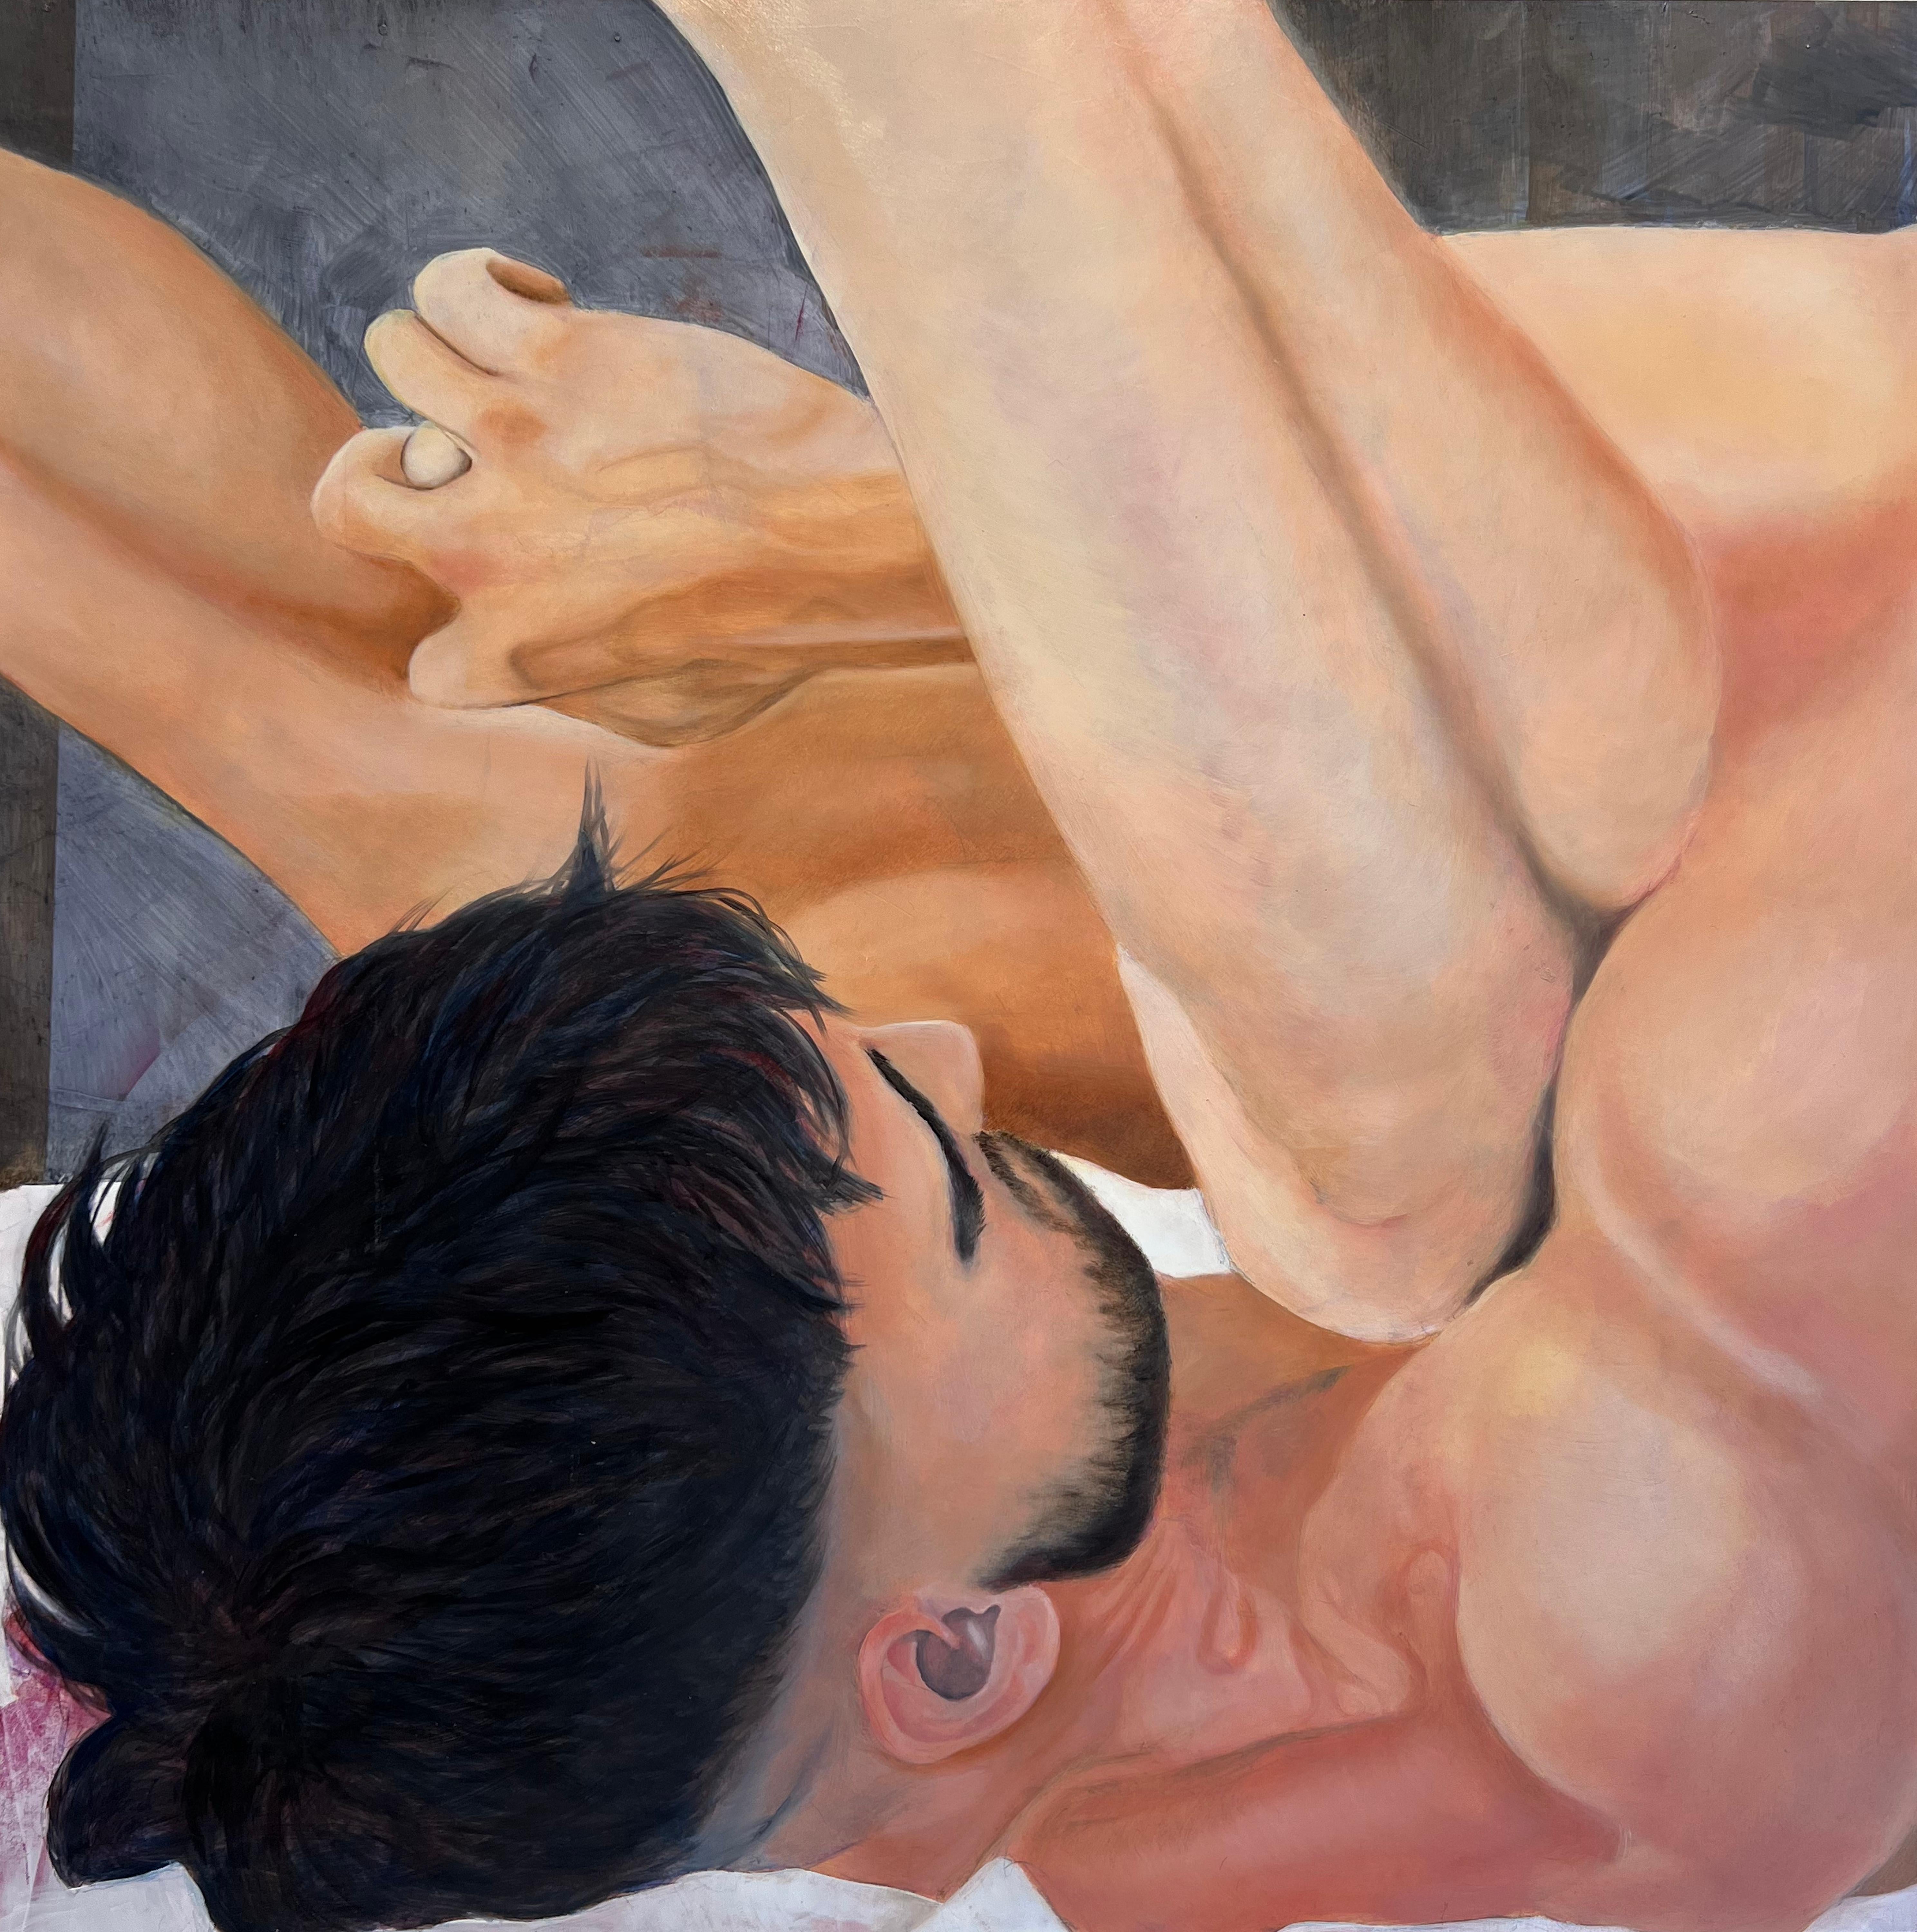 Rick Sindt Figurative Painting - No One Is Sure - Nude Figures, Intimate Portrayal of a Couple, Original Oil